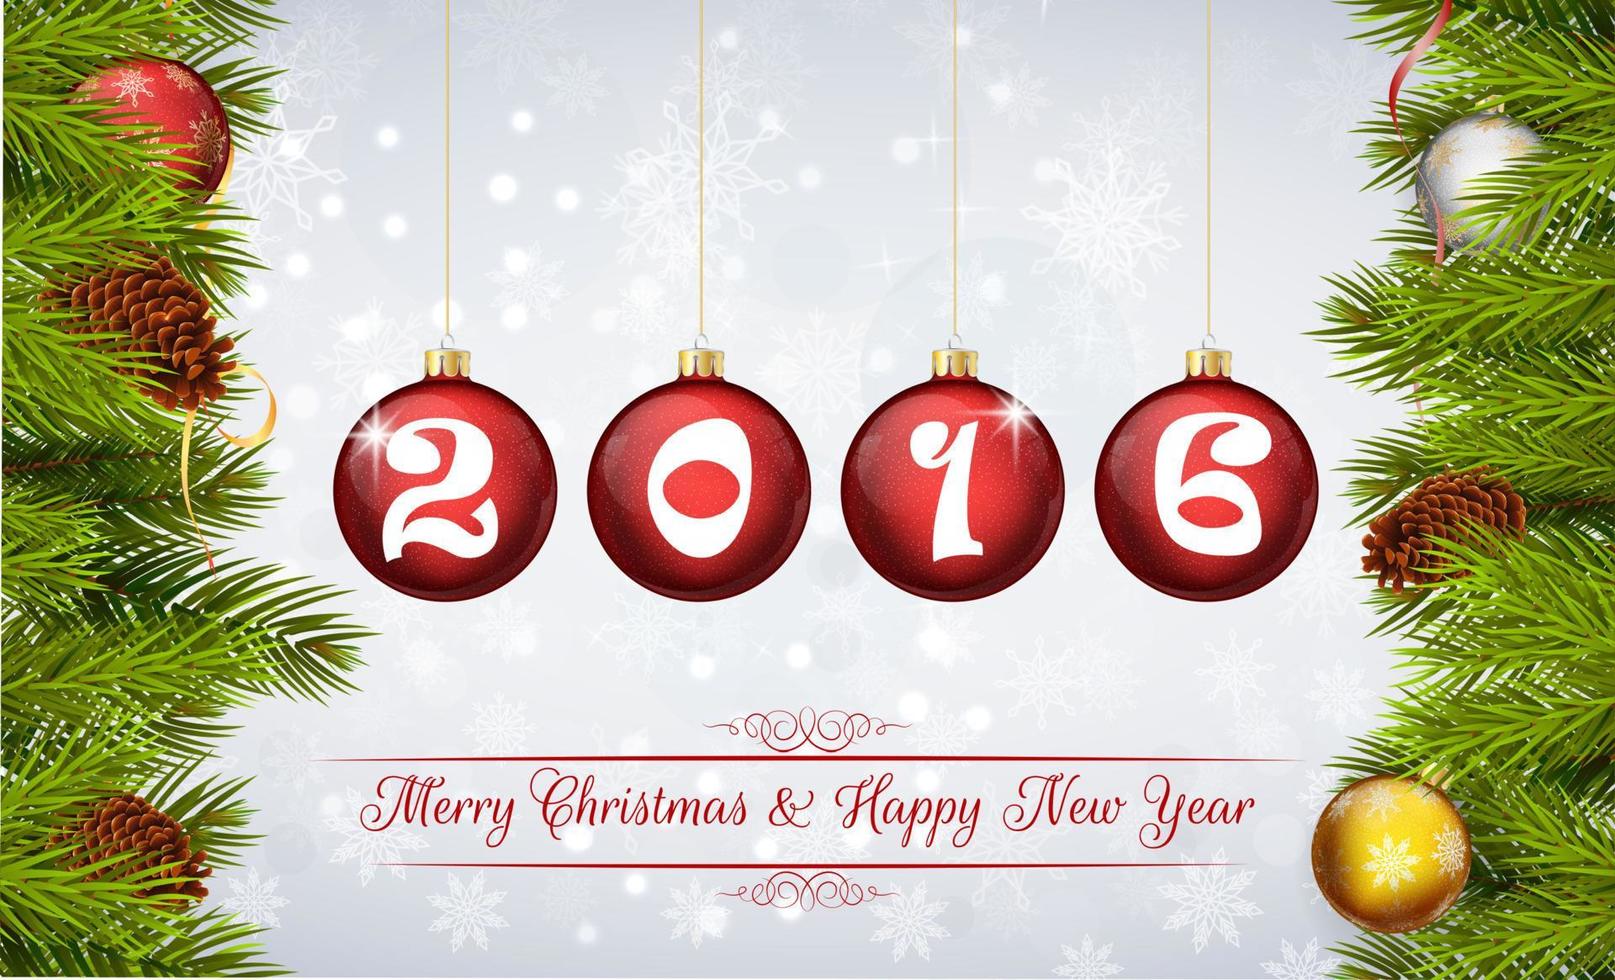 Happy New Year 2016 background vector